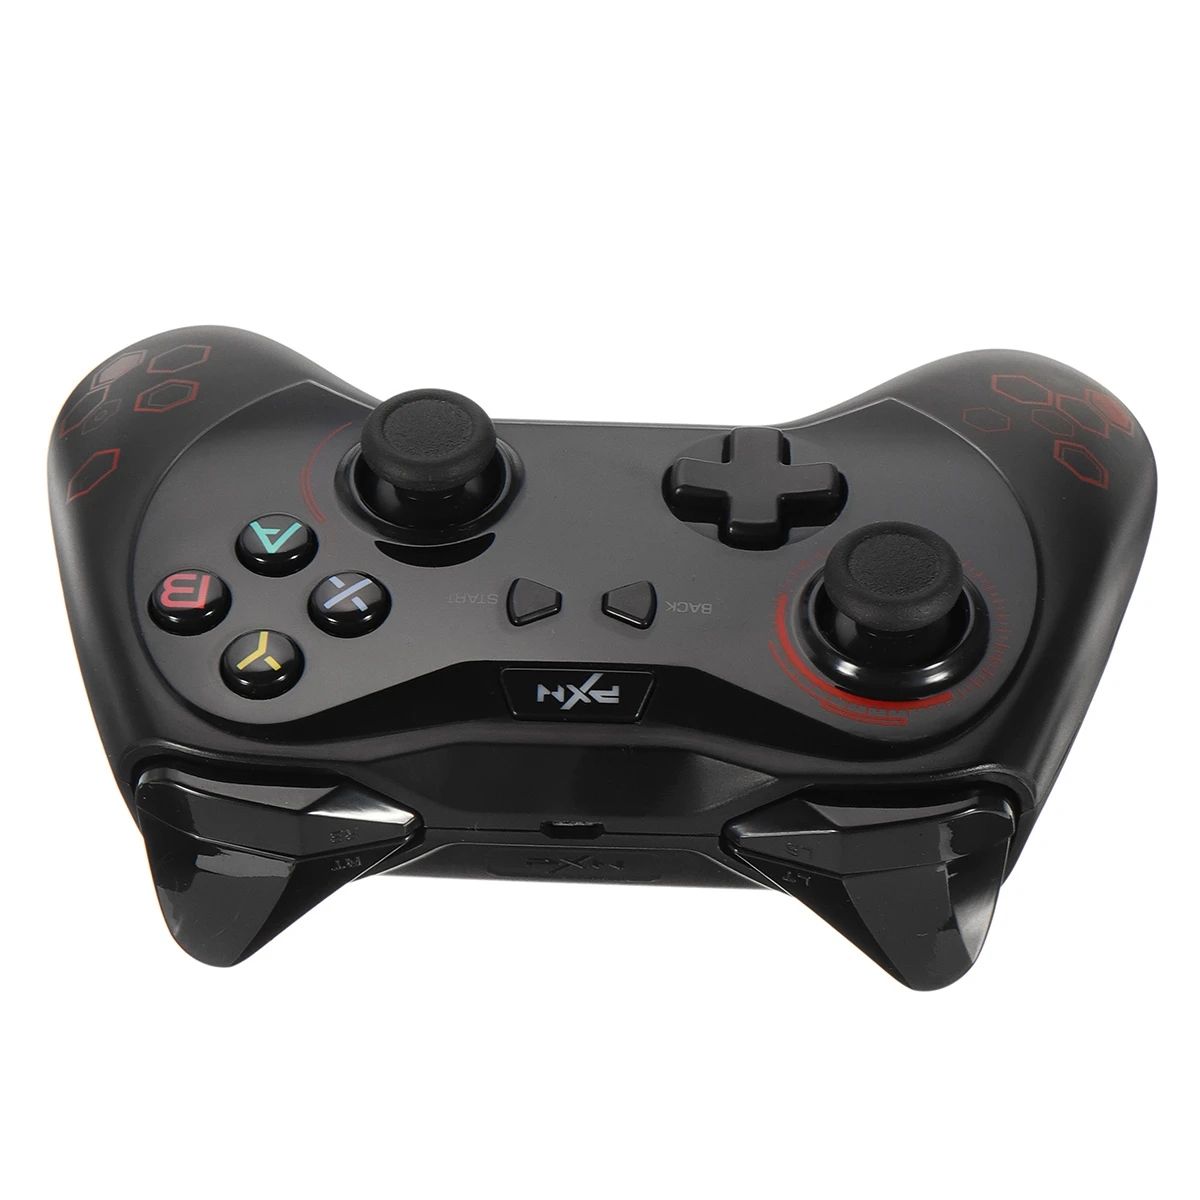 PXN-9606-bluetooth-40-Rechargeable-Gamepad-with-Mobile-Phone-Clip-Android-Mapping-Activator-for-Mobi-1742295